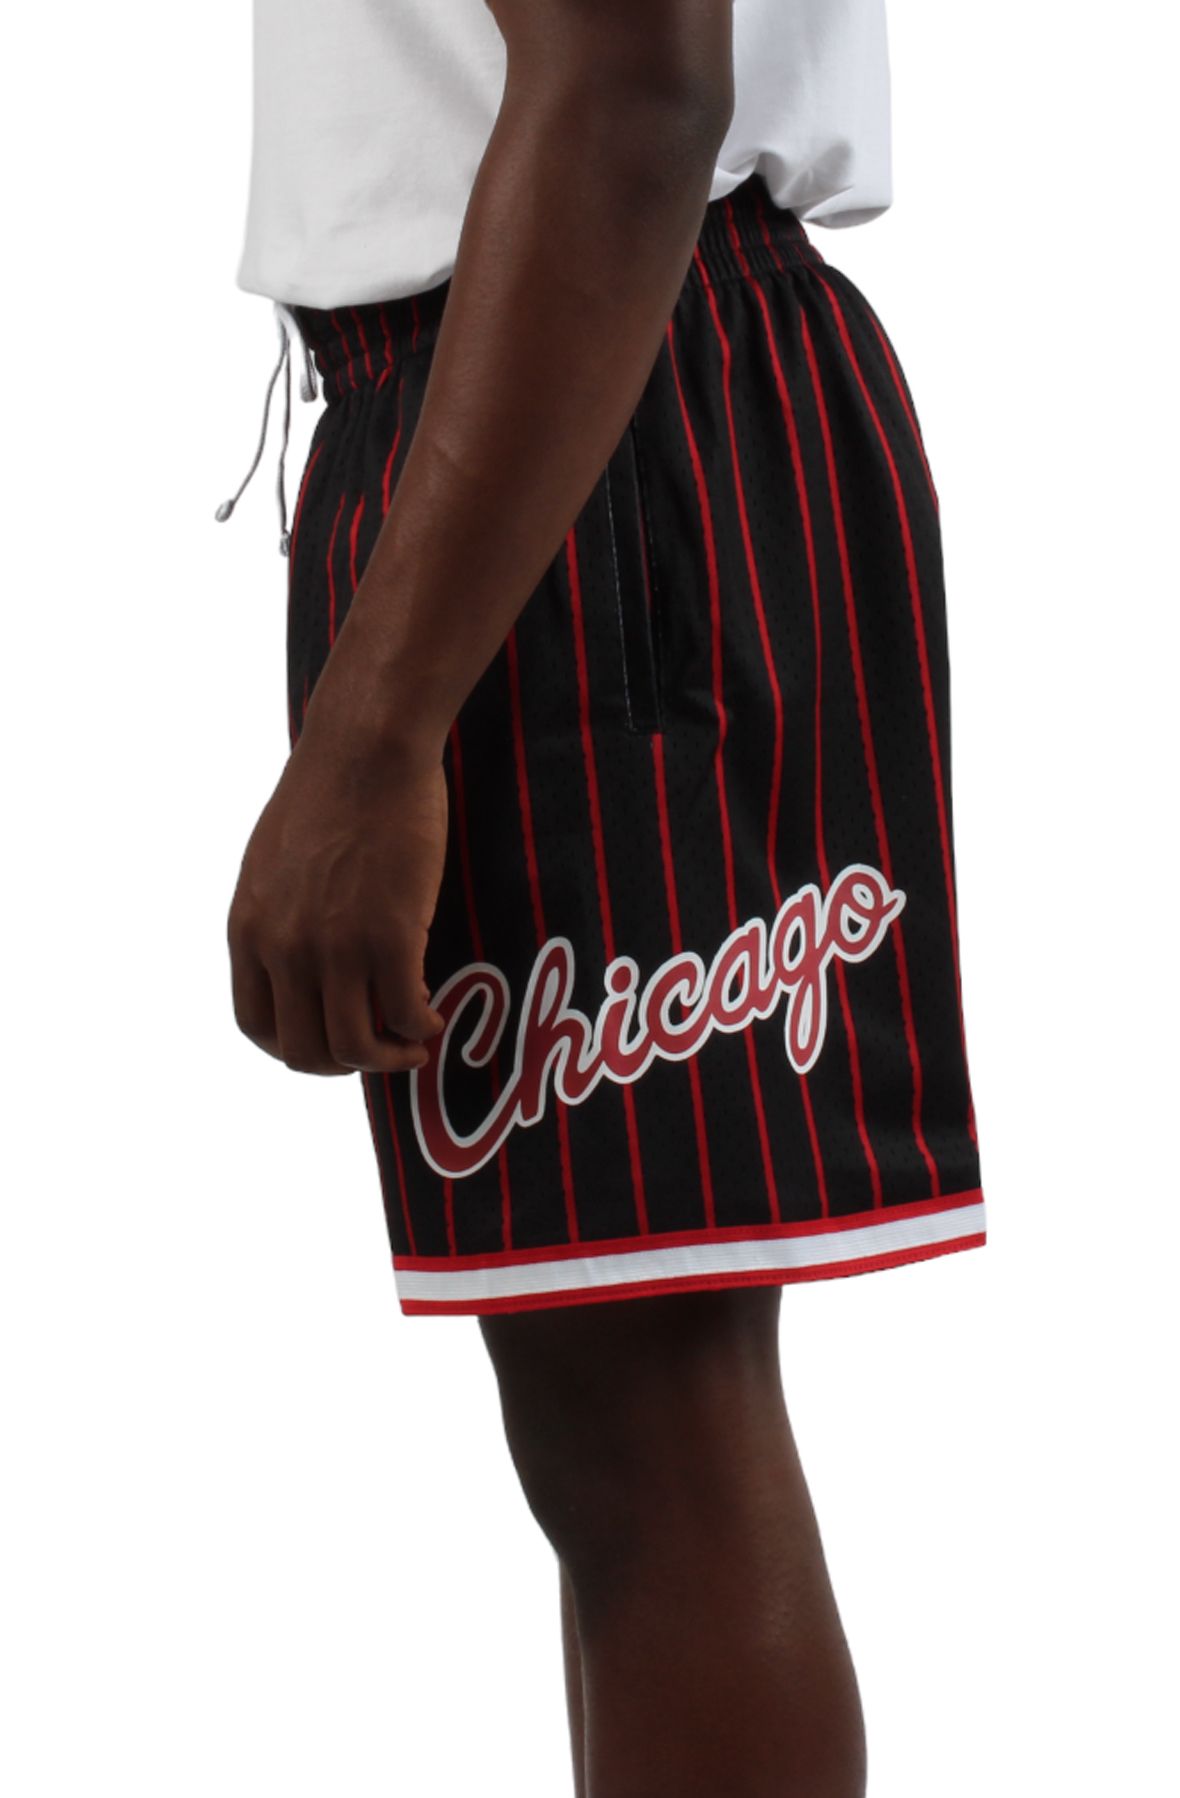 Mitchell & Ness Big Face 2.0 Shorts Chicago Bulls Red - RED